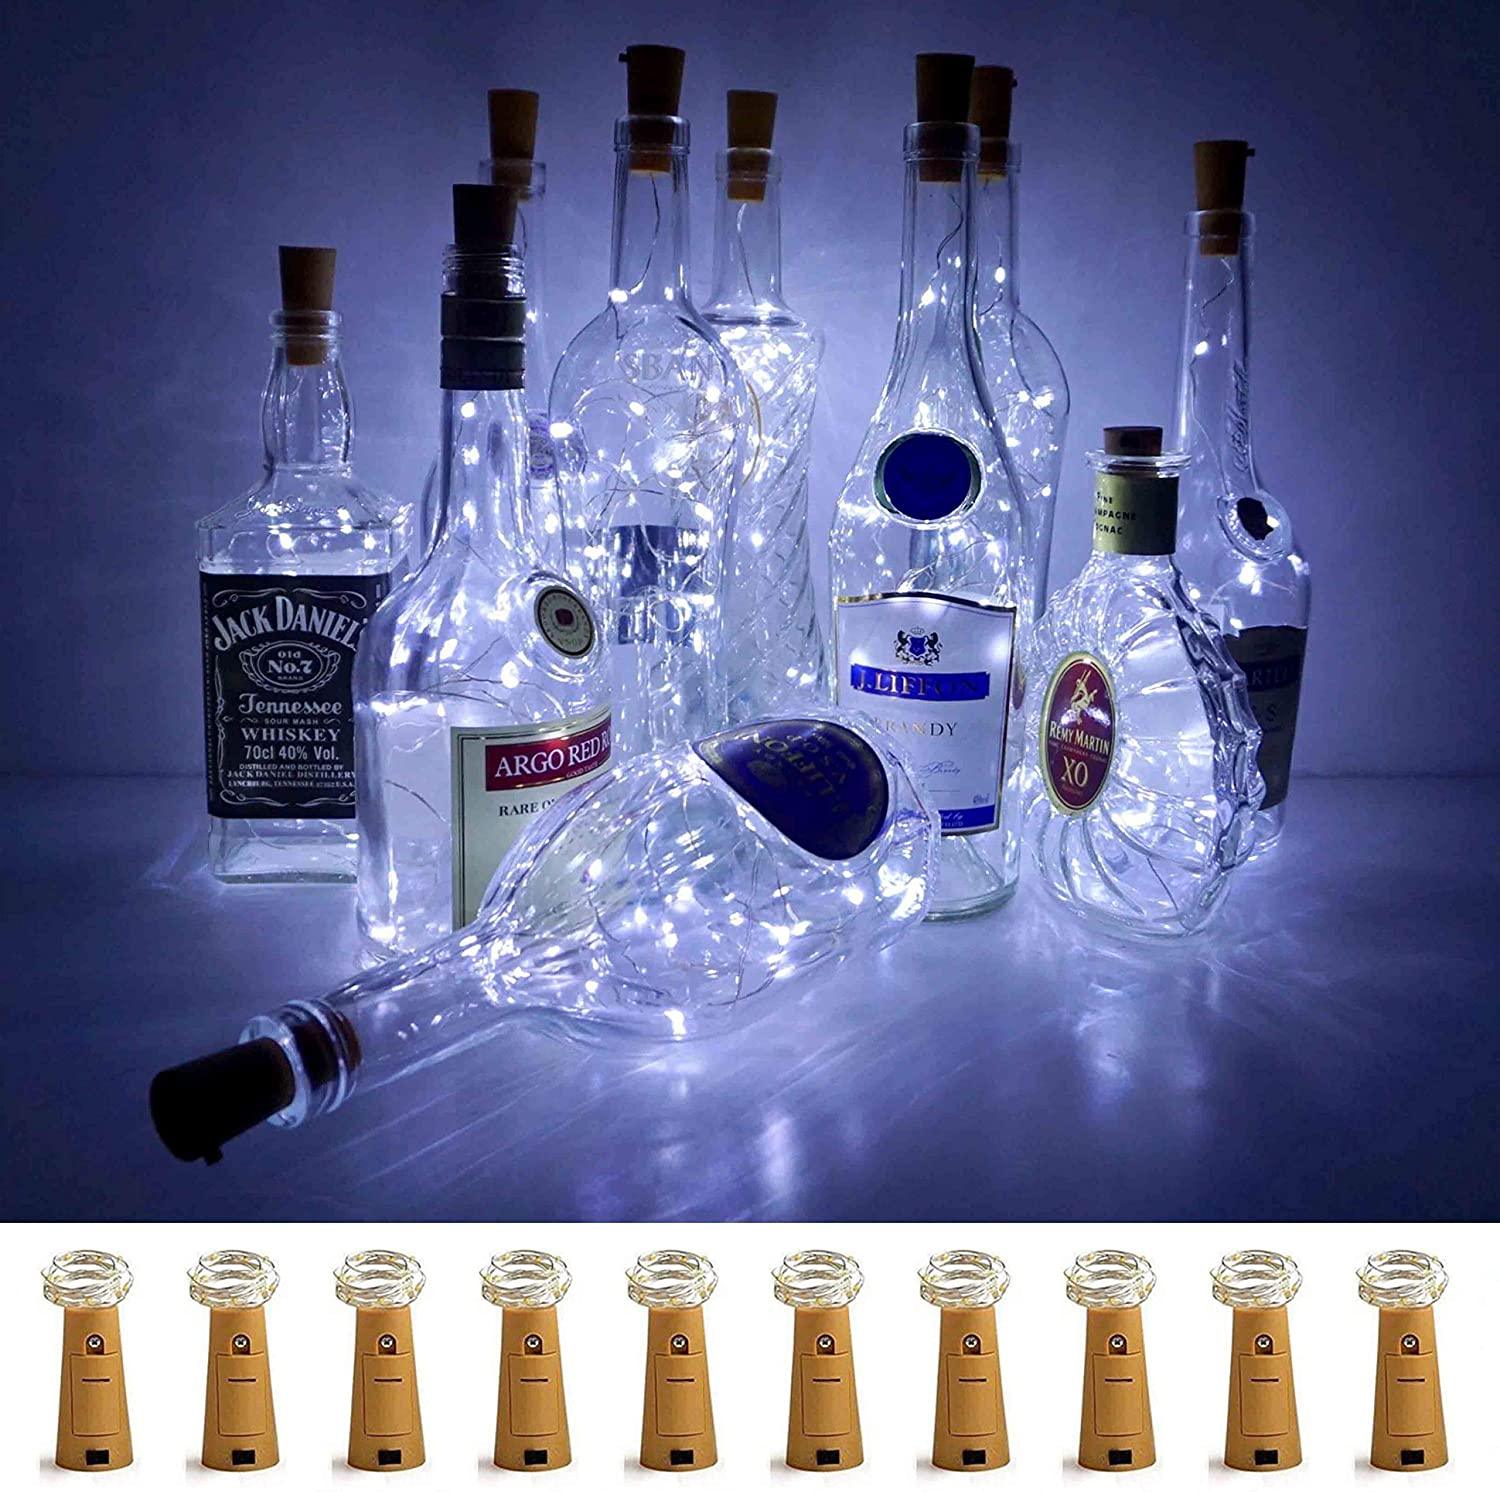 Battery Operated Cork String Lights for Jar Party - If you say i do